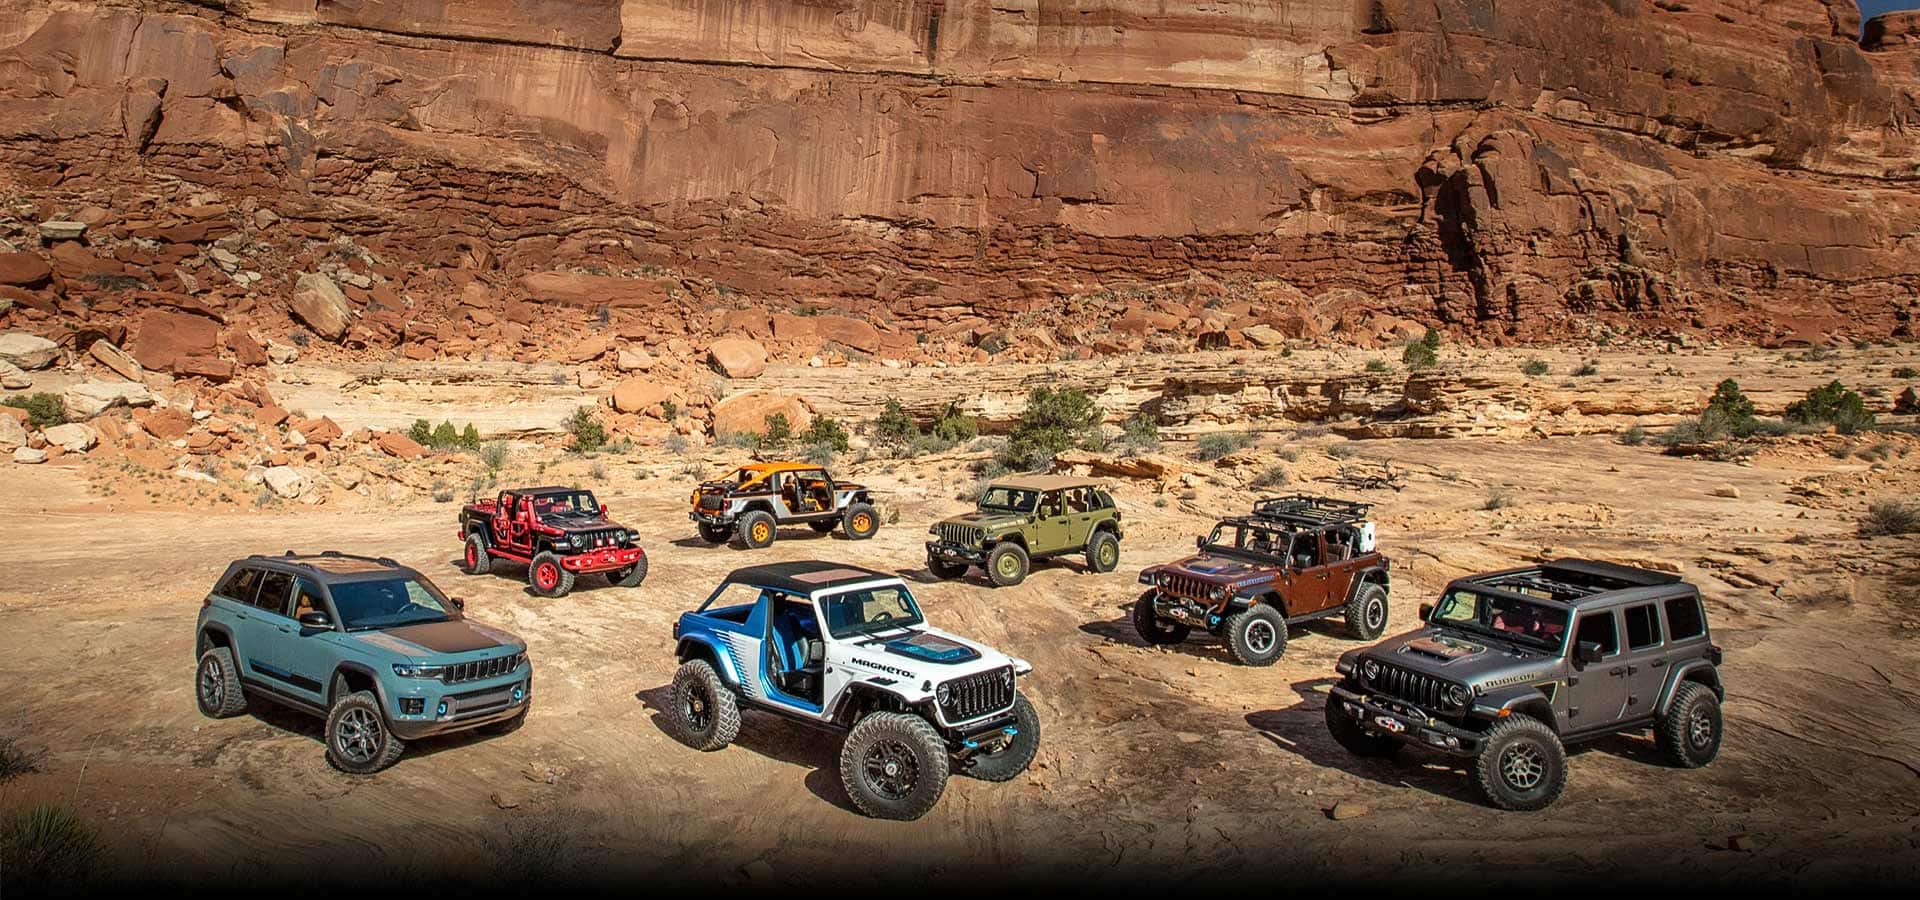 Seven Jeep Brand concept vehicles parked on a sandy plain with a red rock cliff rising behind them.